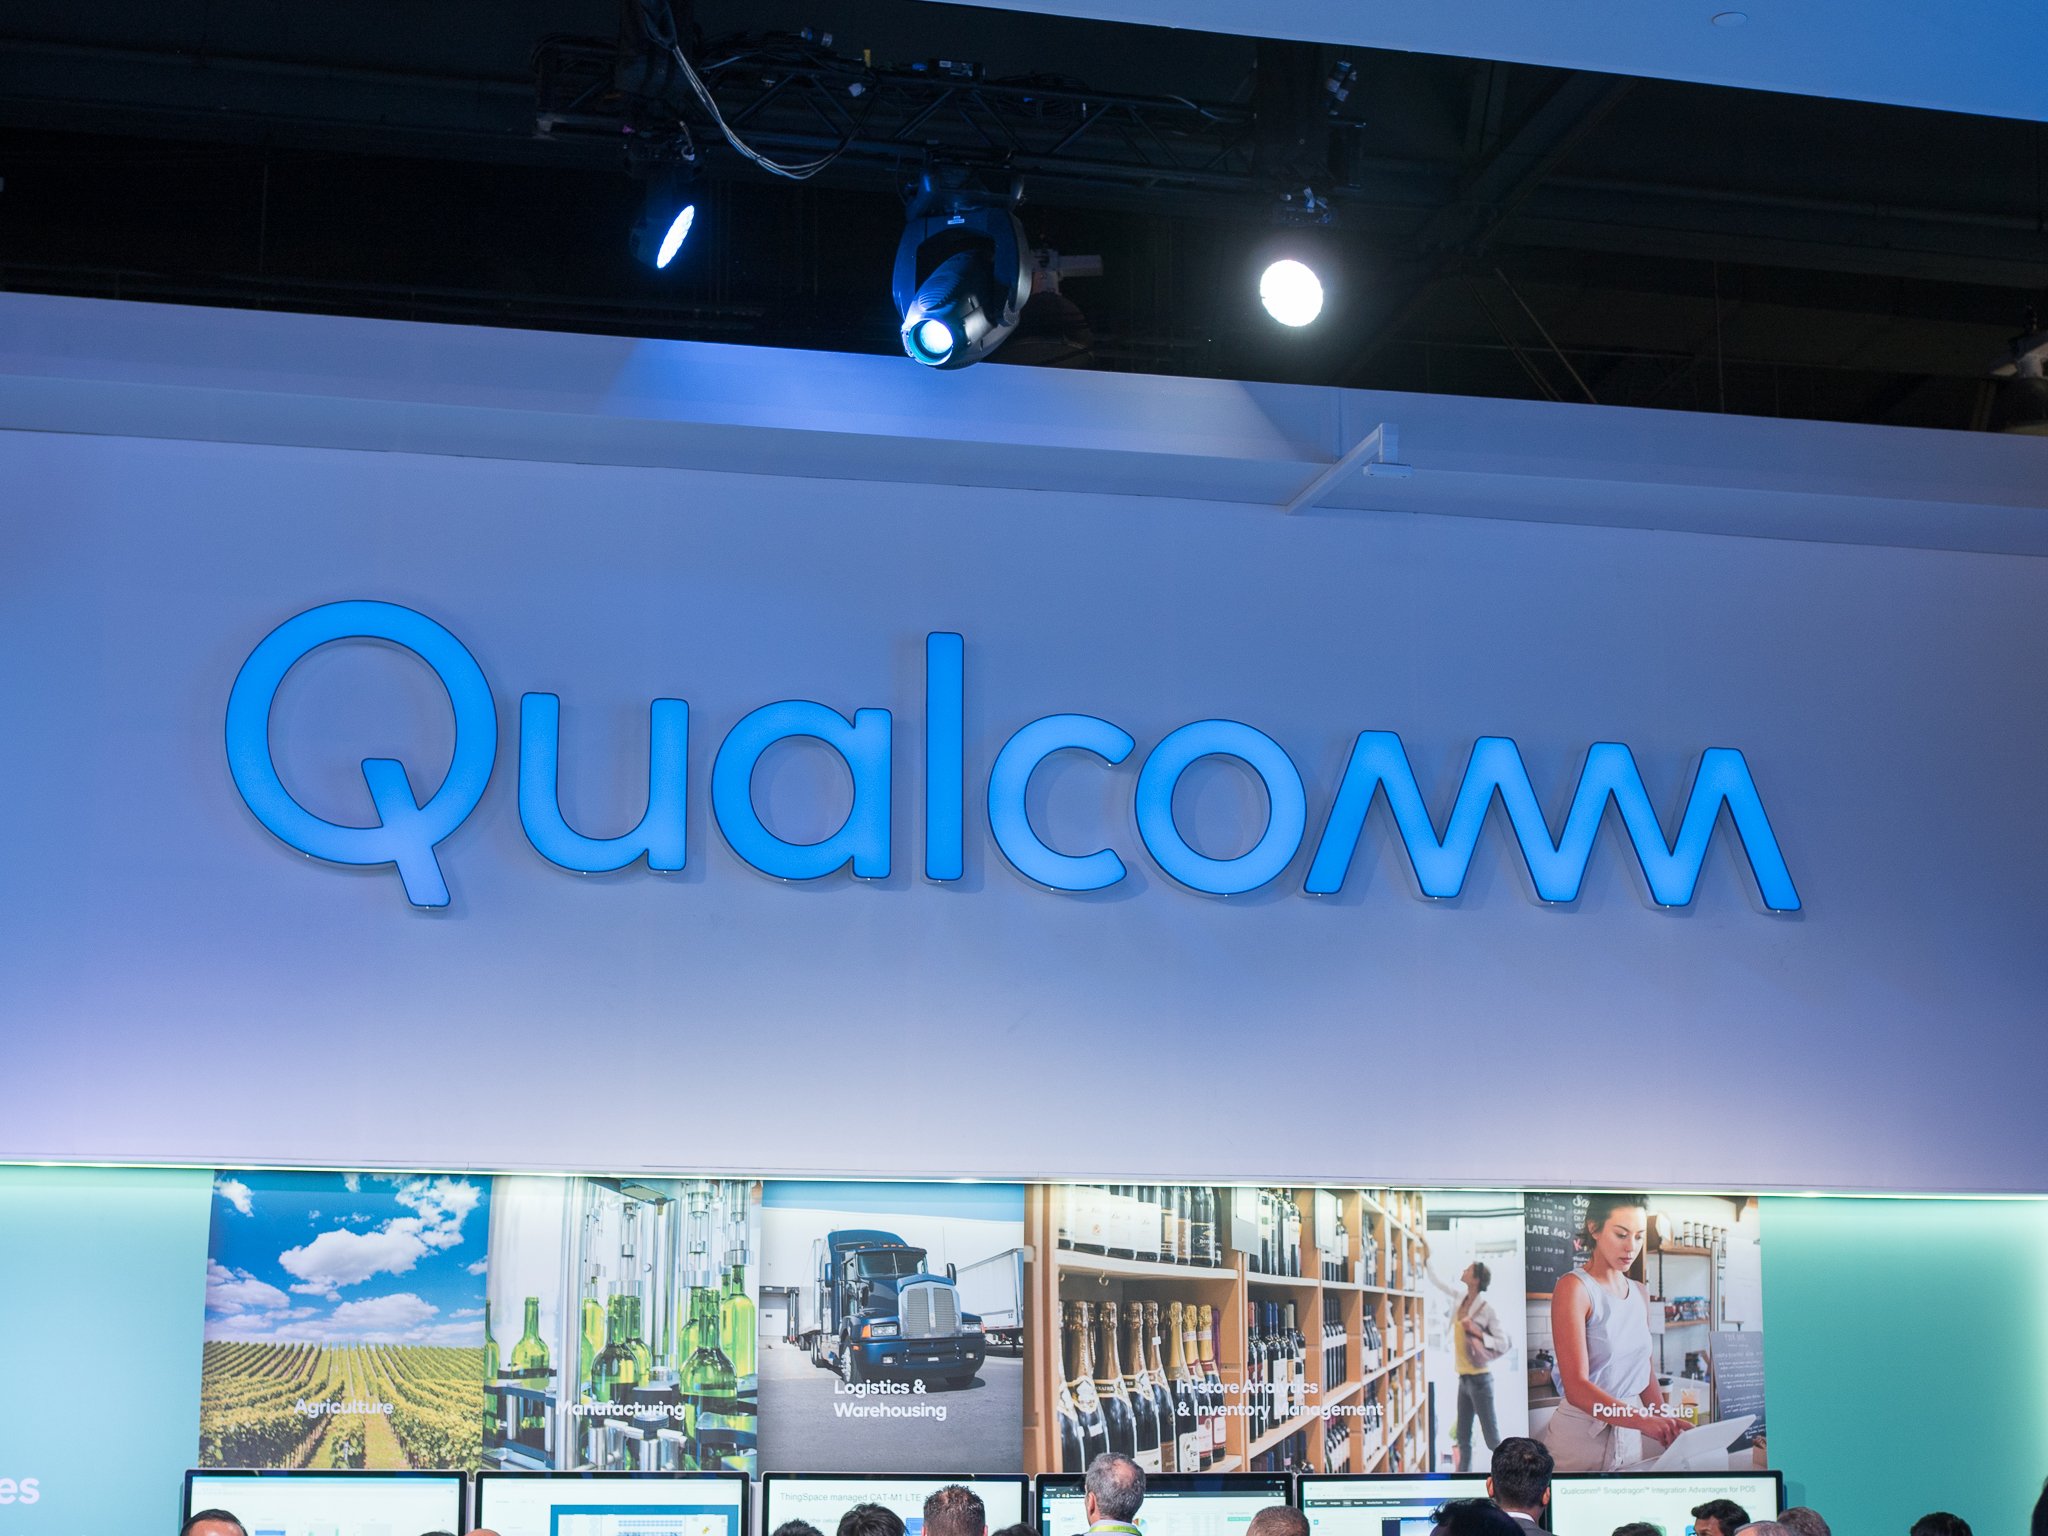 Qualcomm booth at CES 2018